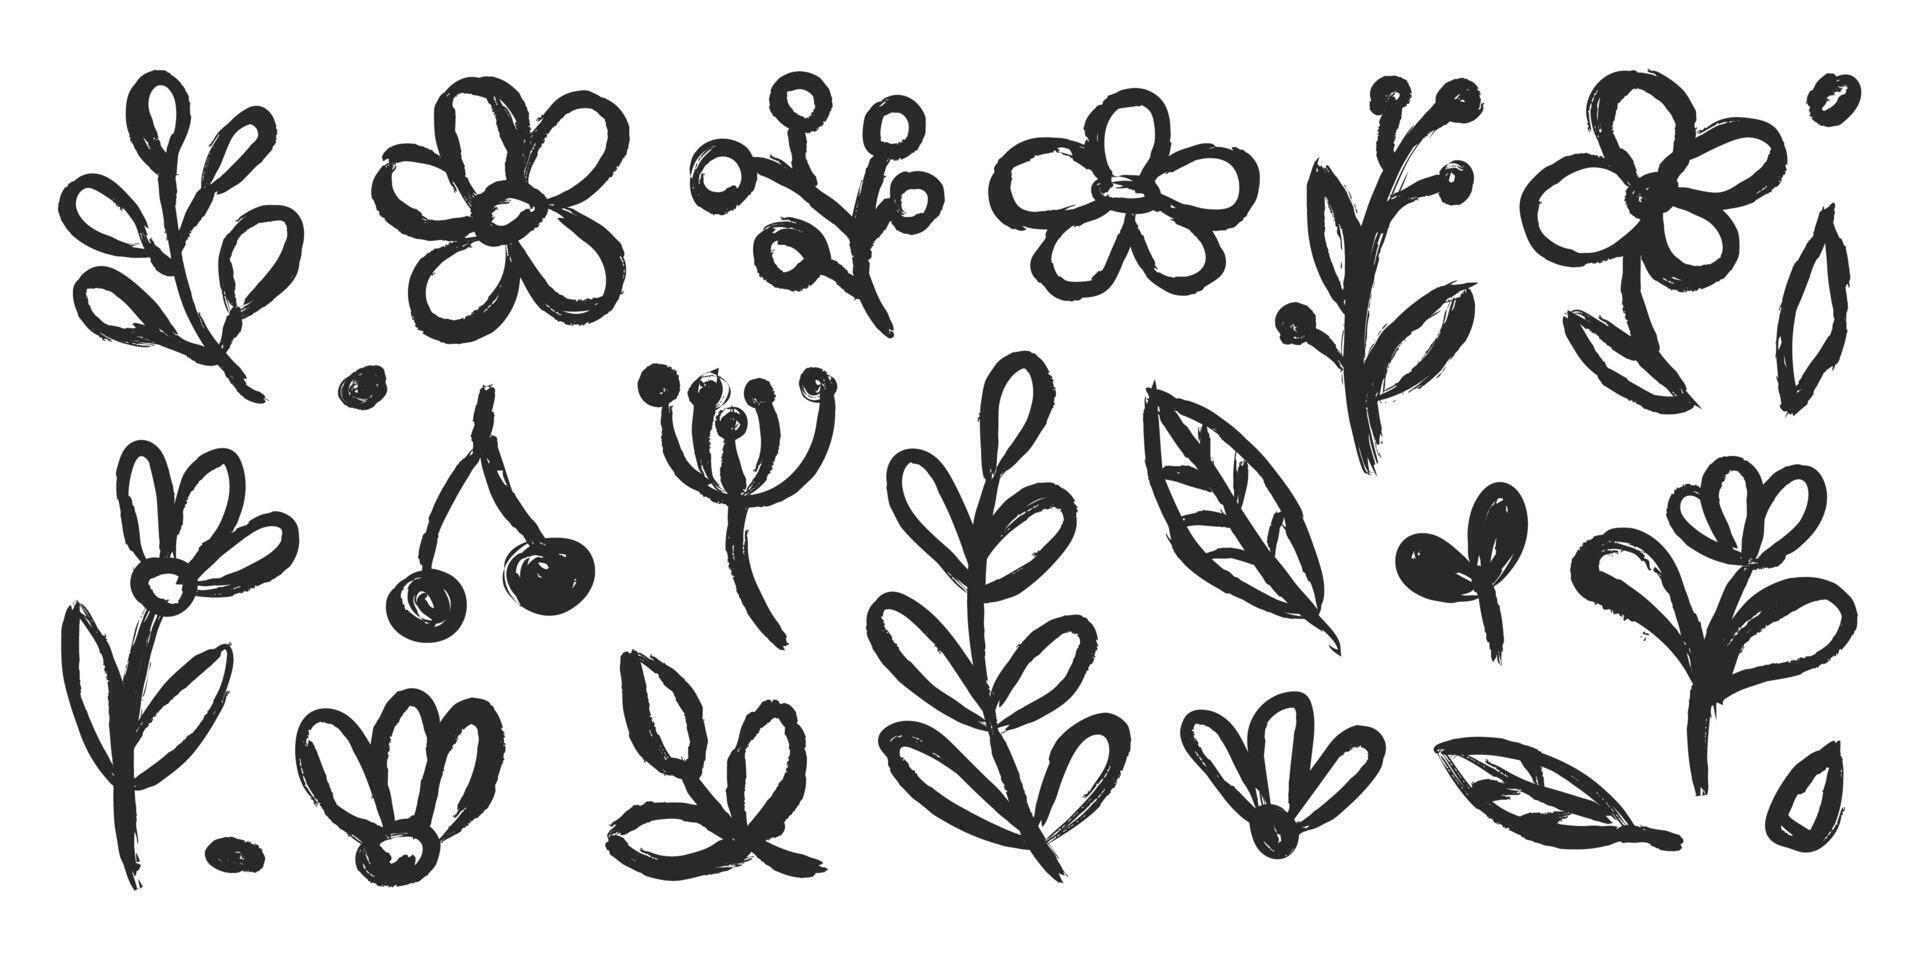 Floral doodle hand drawn with grunge brush texture. Vector simple flower, leaf brush stroke.